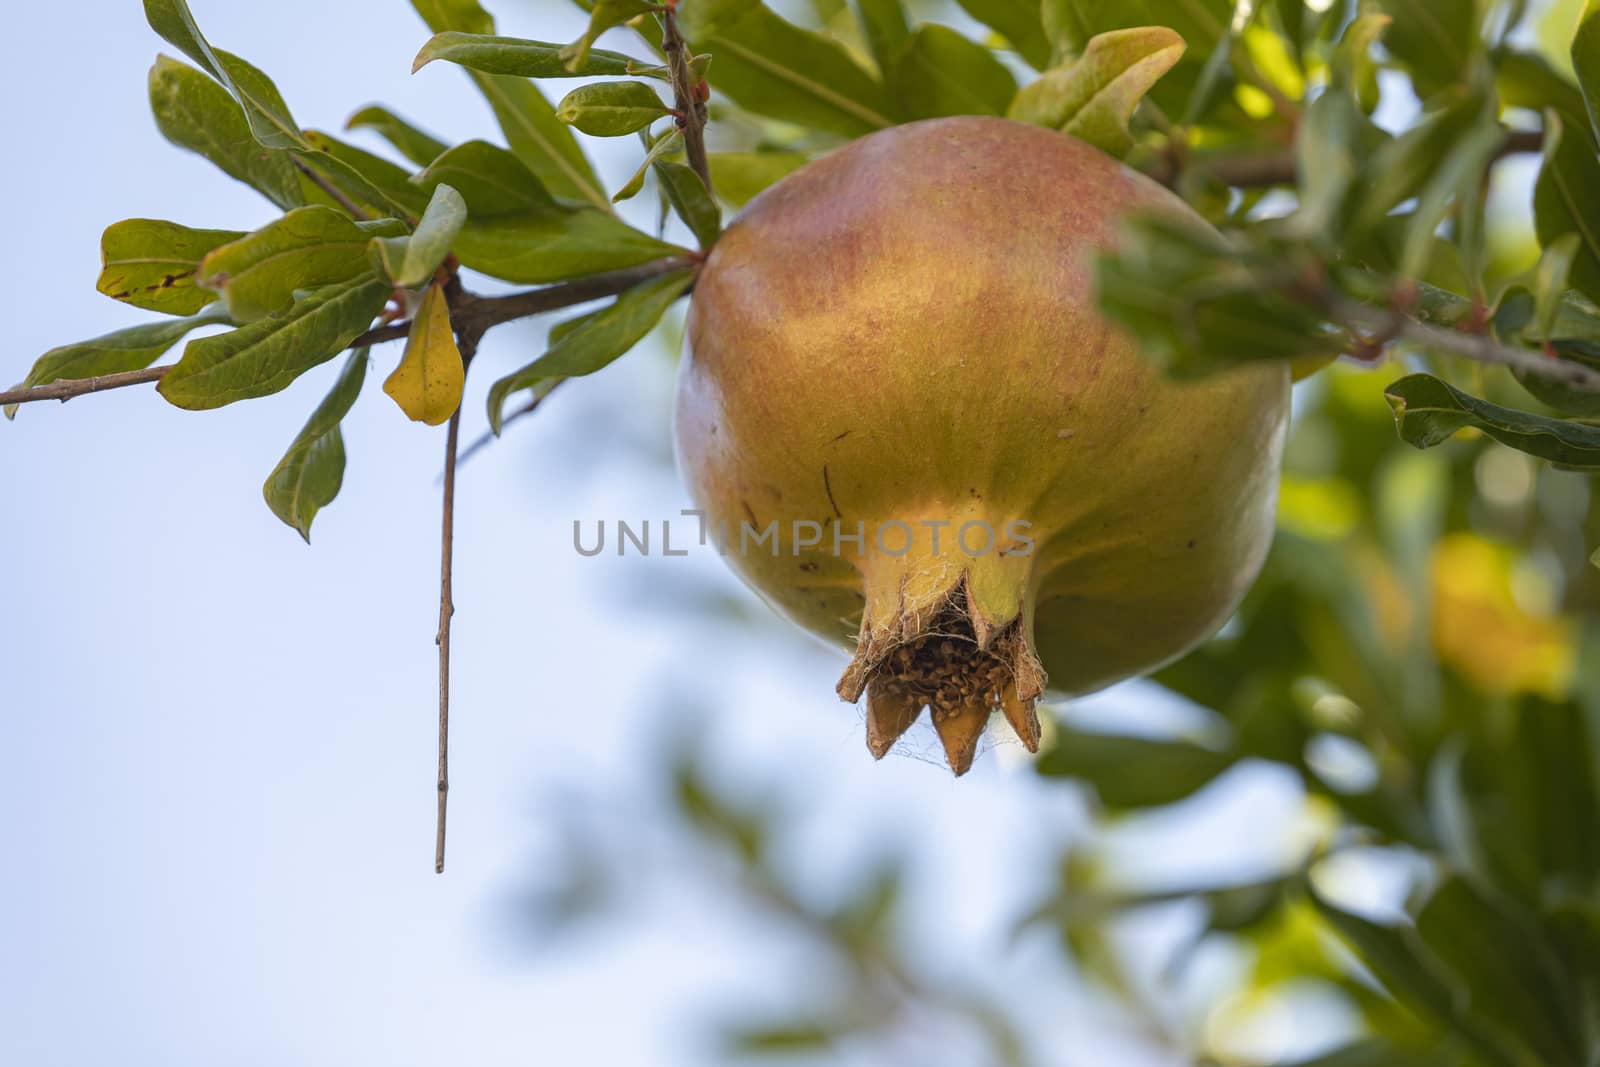 Pomegranate fruit hangs from the branches of a tree in Spain by alvarobueno